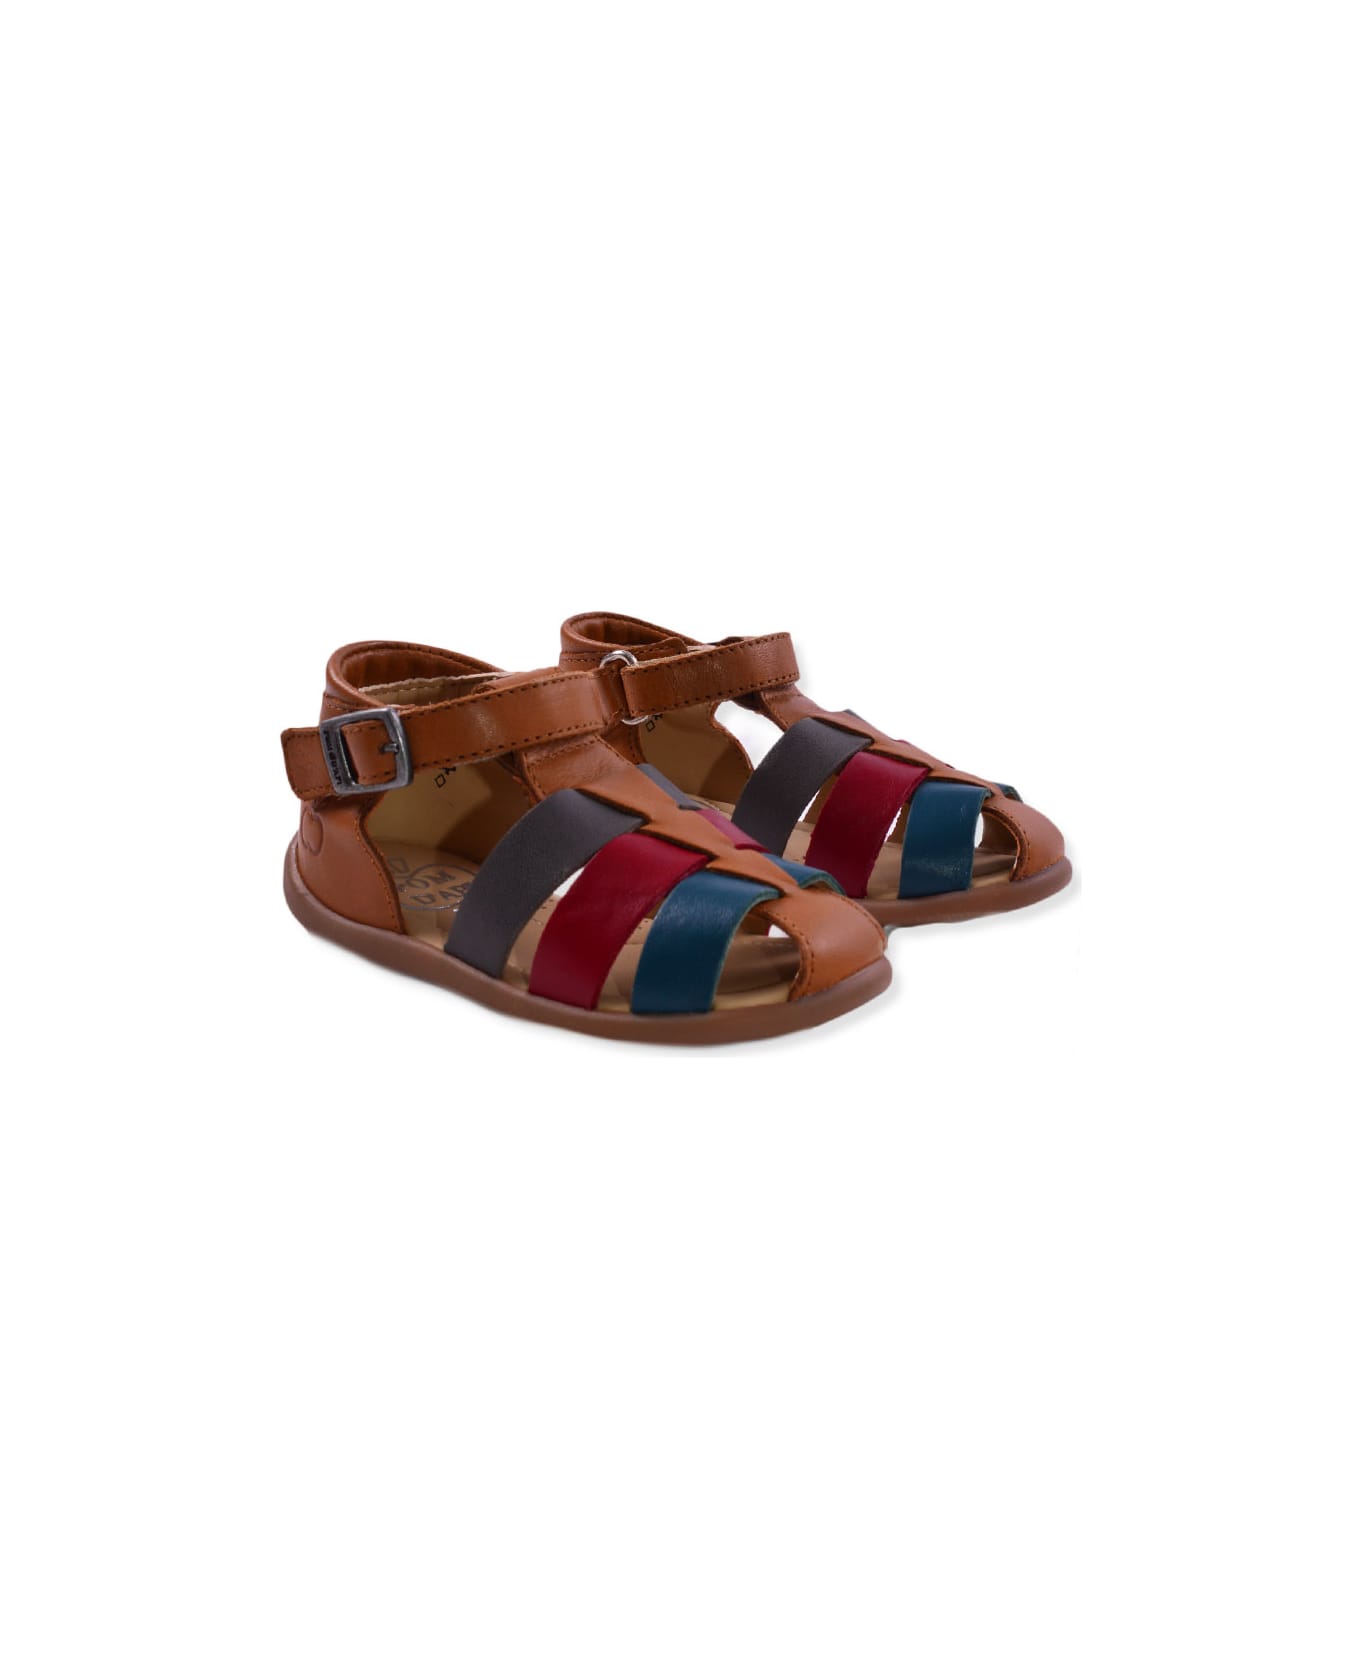 Pom d'Api Sandals In Colored Leather - Brown